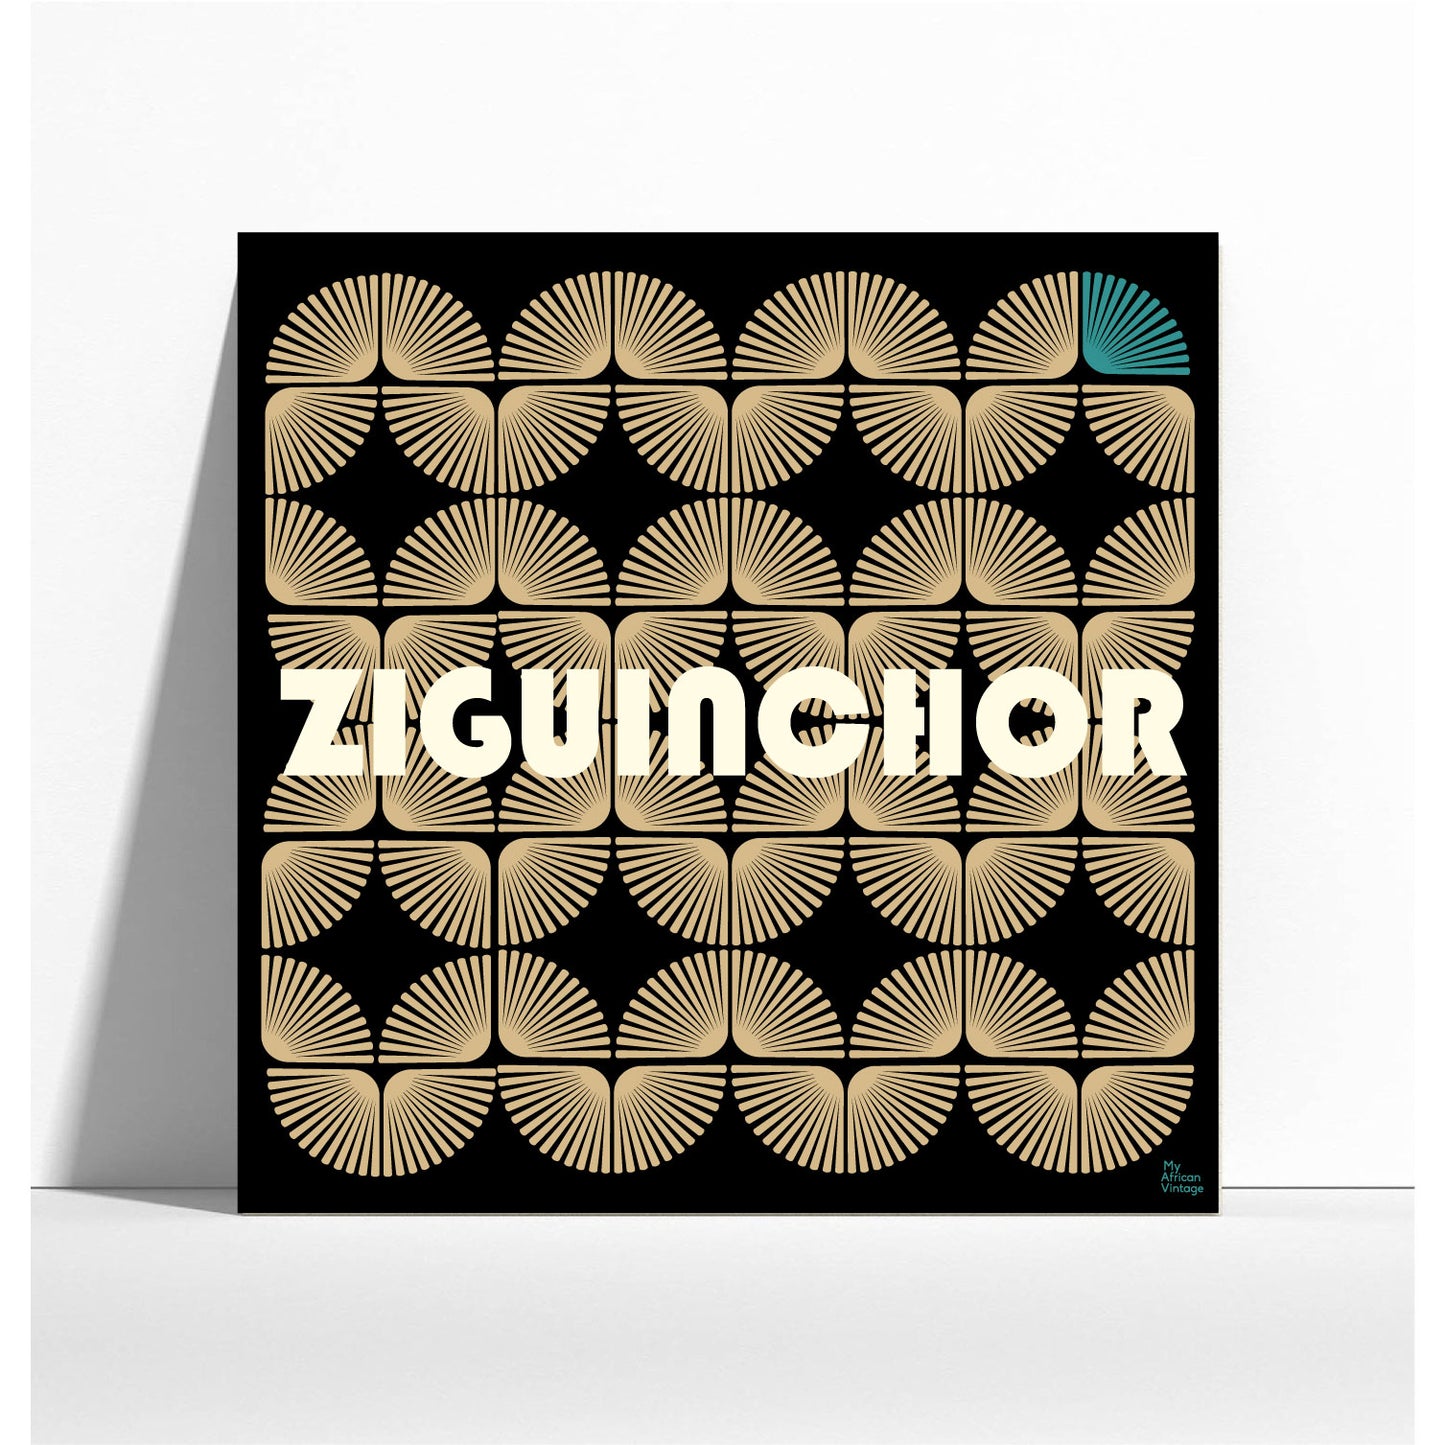 "Ziguinchor" retro style poster - "My African Vintage" collection